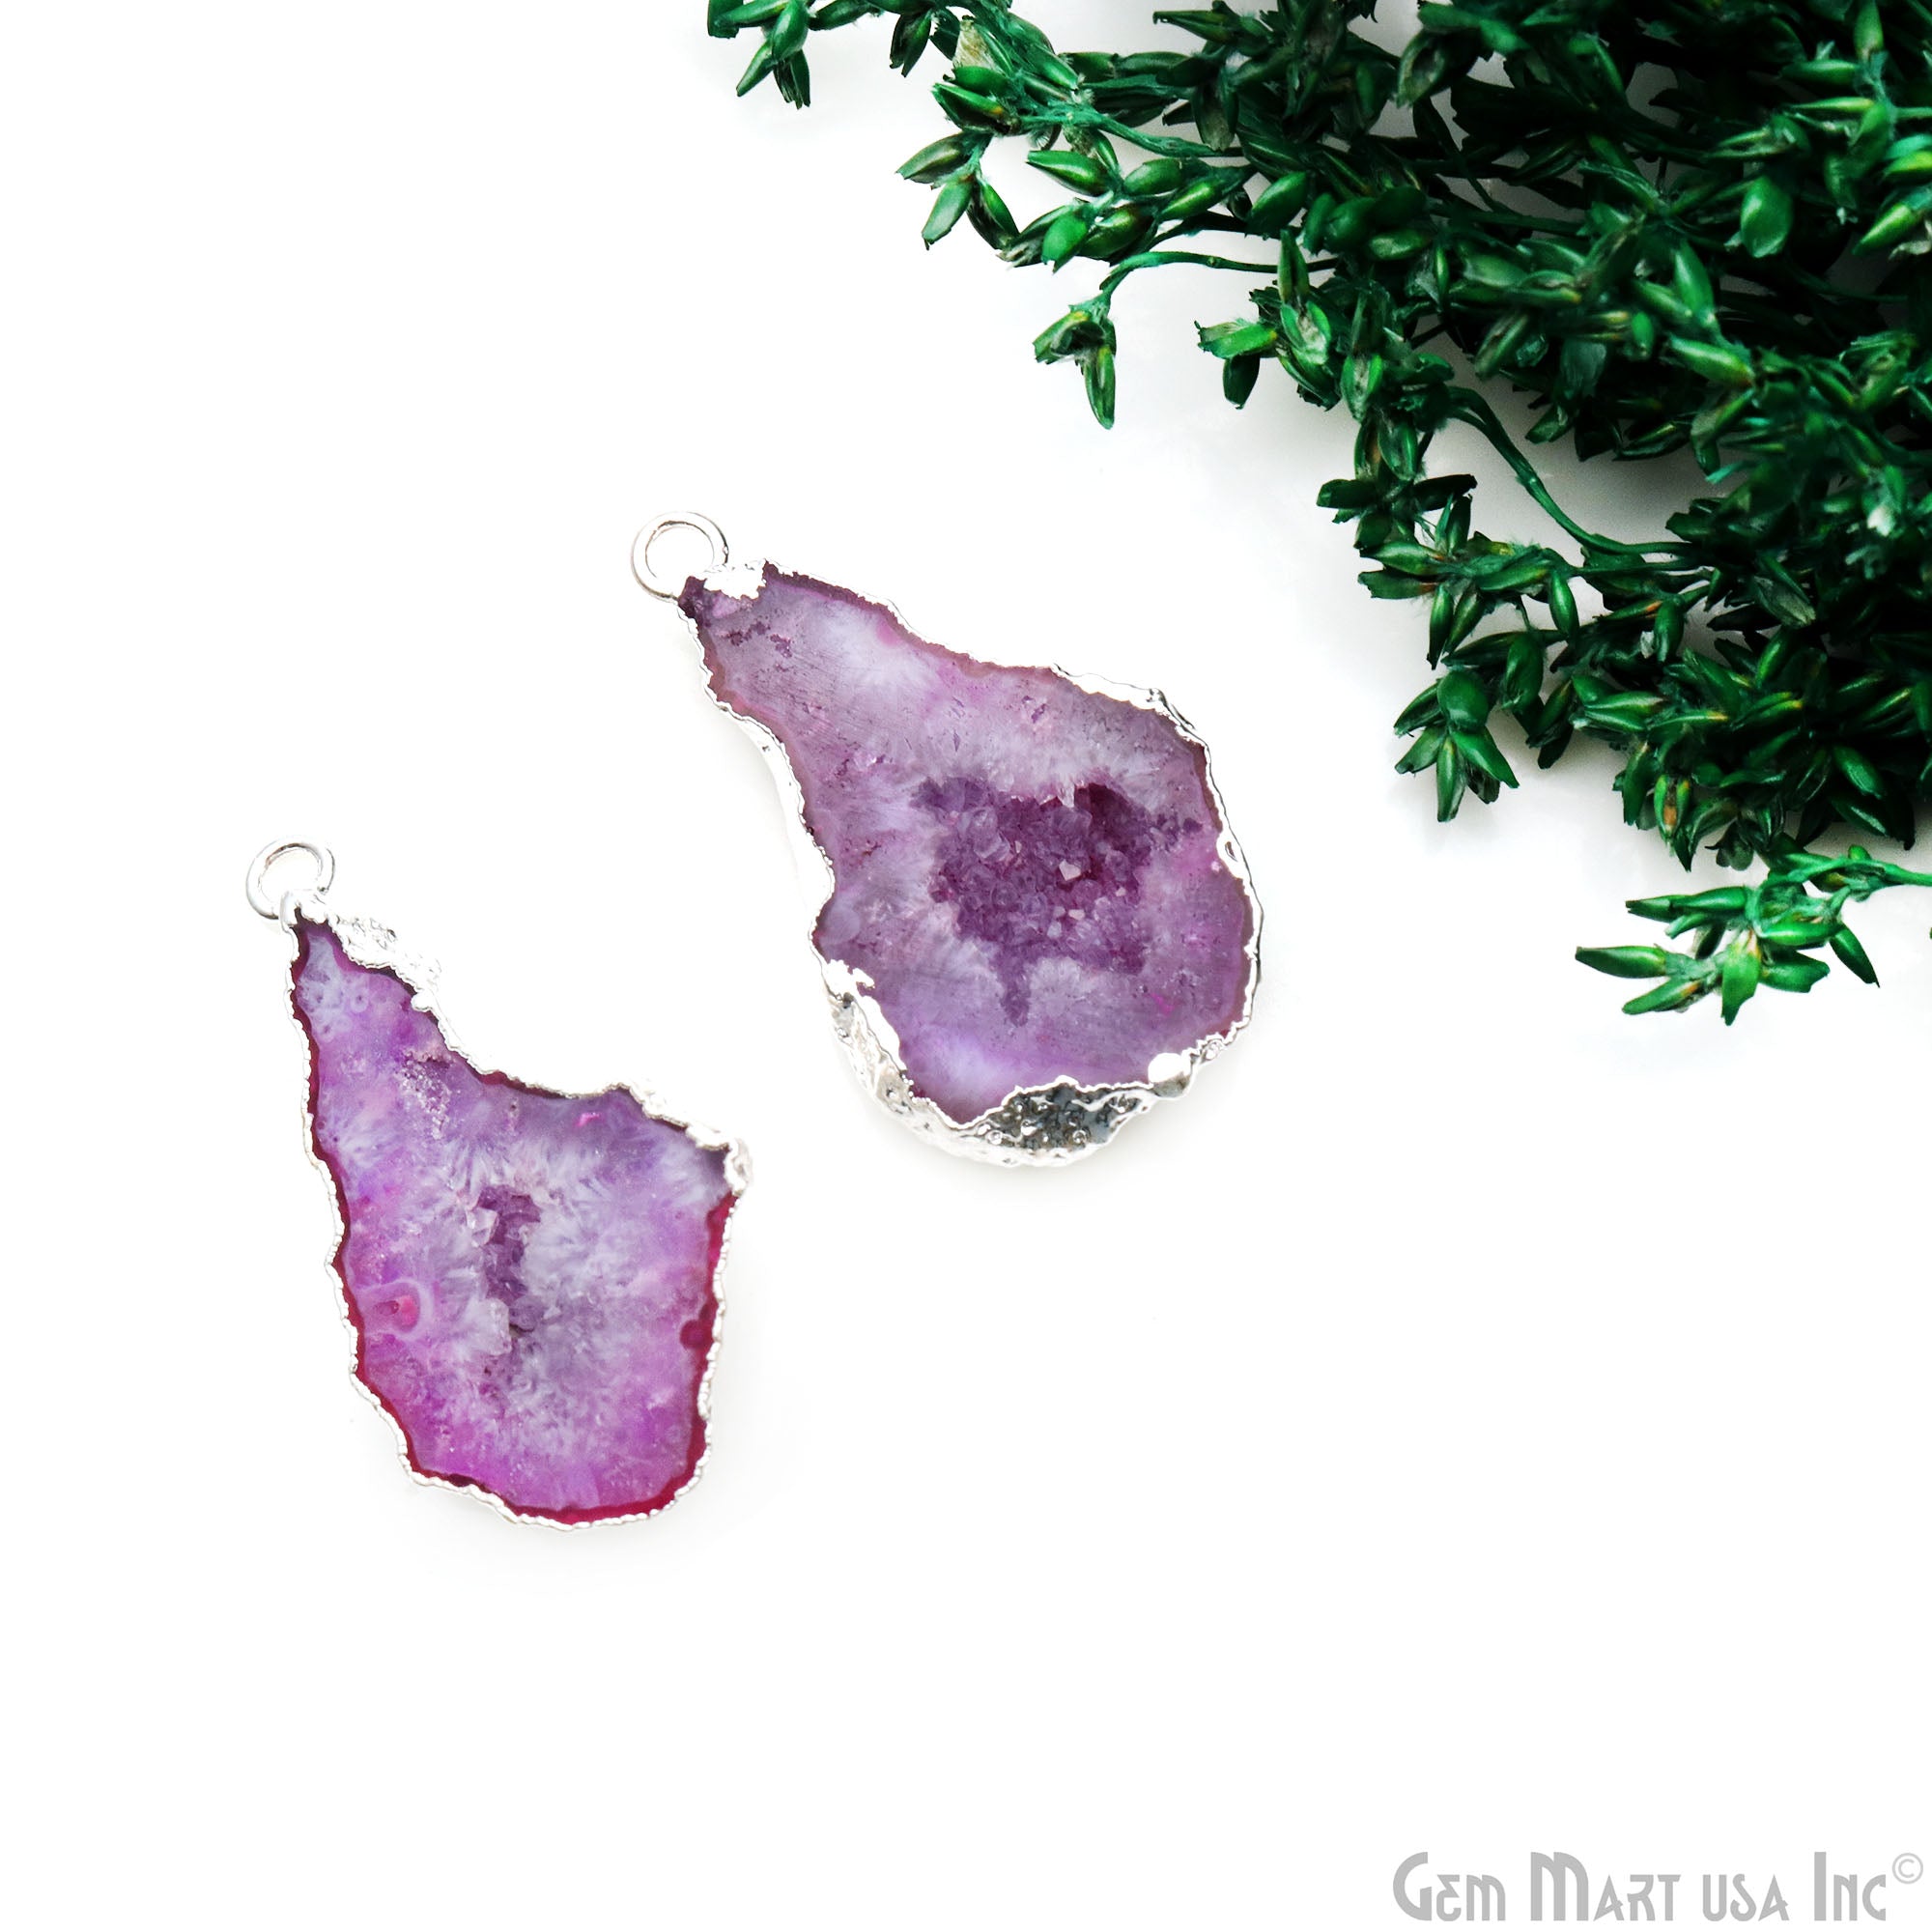 Geode Druzy 35x19mm Organic Silver Electroplated Single Bail Gemstone Earring Connector 1 Pair